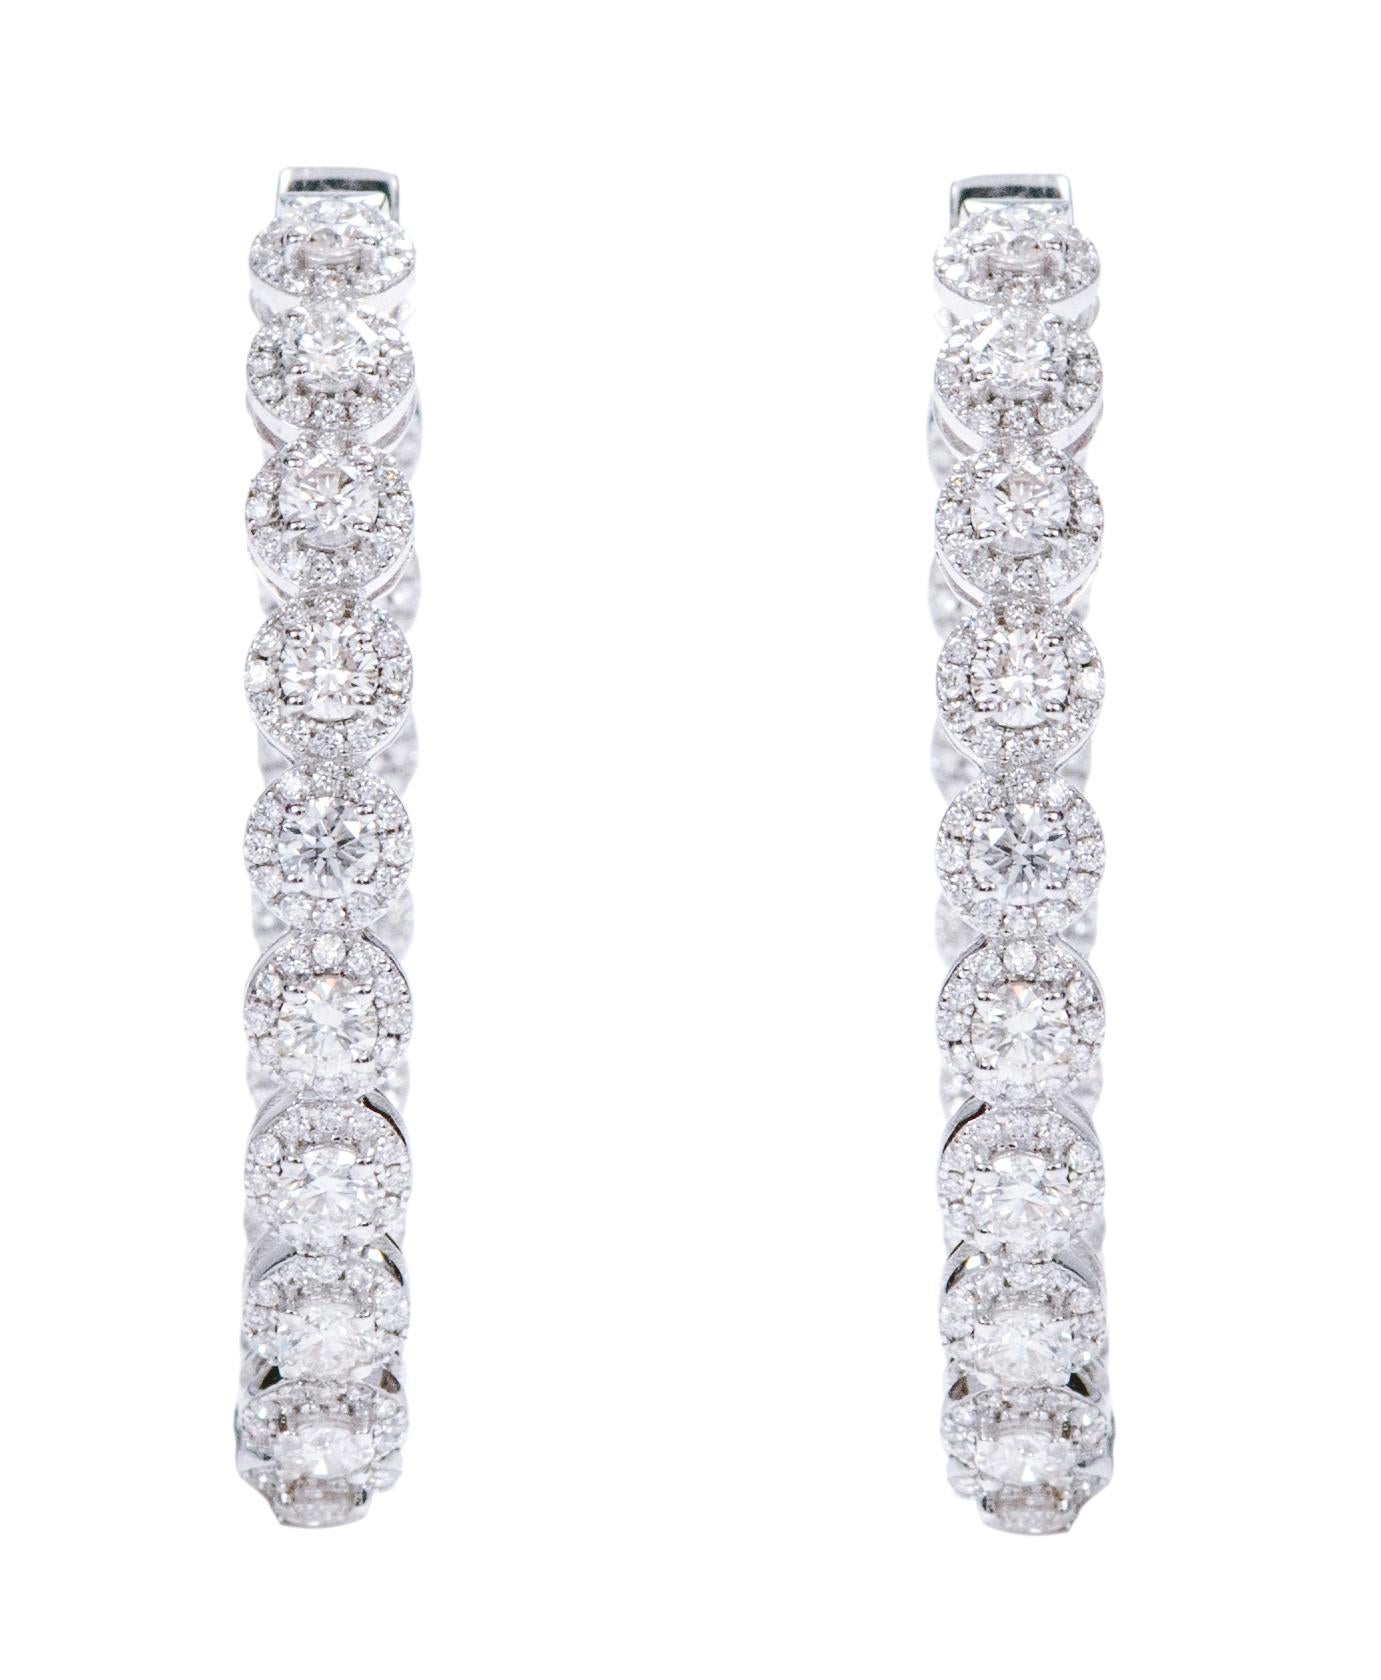 18 Karat White Gold 5.17 Carat Brilliant-Cut Diamond Cluster Hoop Earrings

This is a classy delightful diamond solitaire round hoop earring. The perfect brilliant round diamonds set in white gold prongs are hinted by sophistication with the